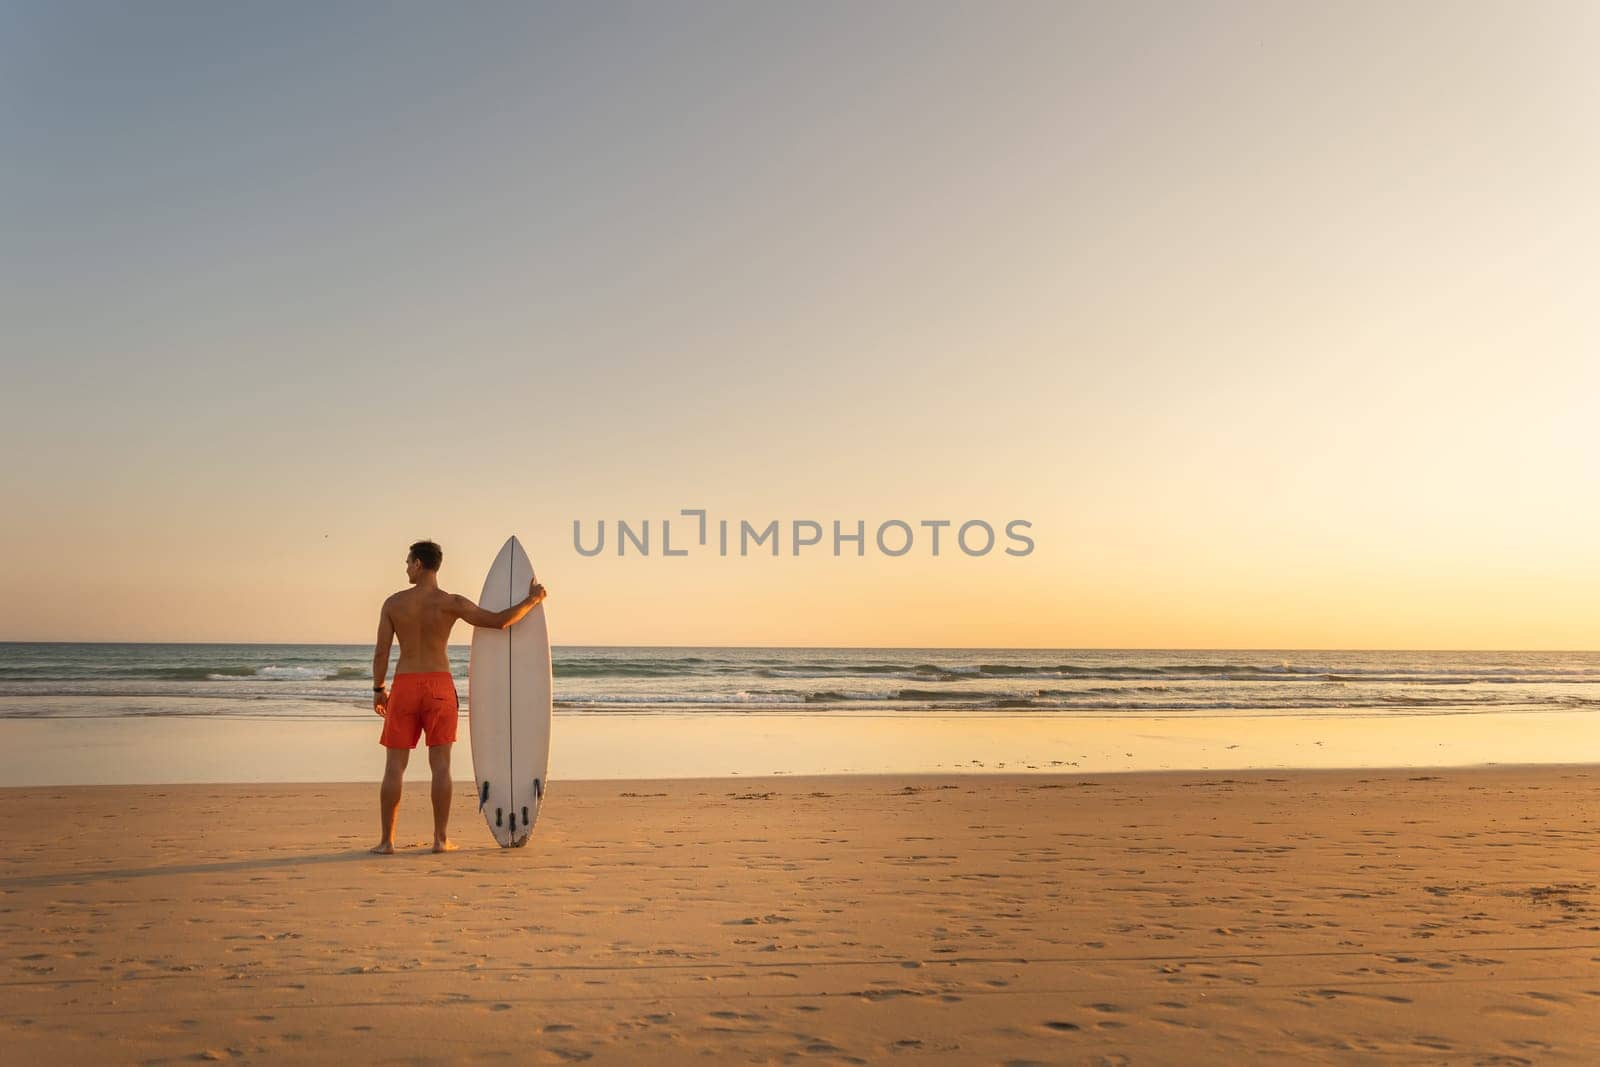 A man with athletic body standing on the shore holding a surfboard at early sunset - view from the back. Mid shot